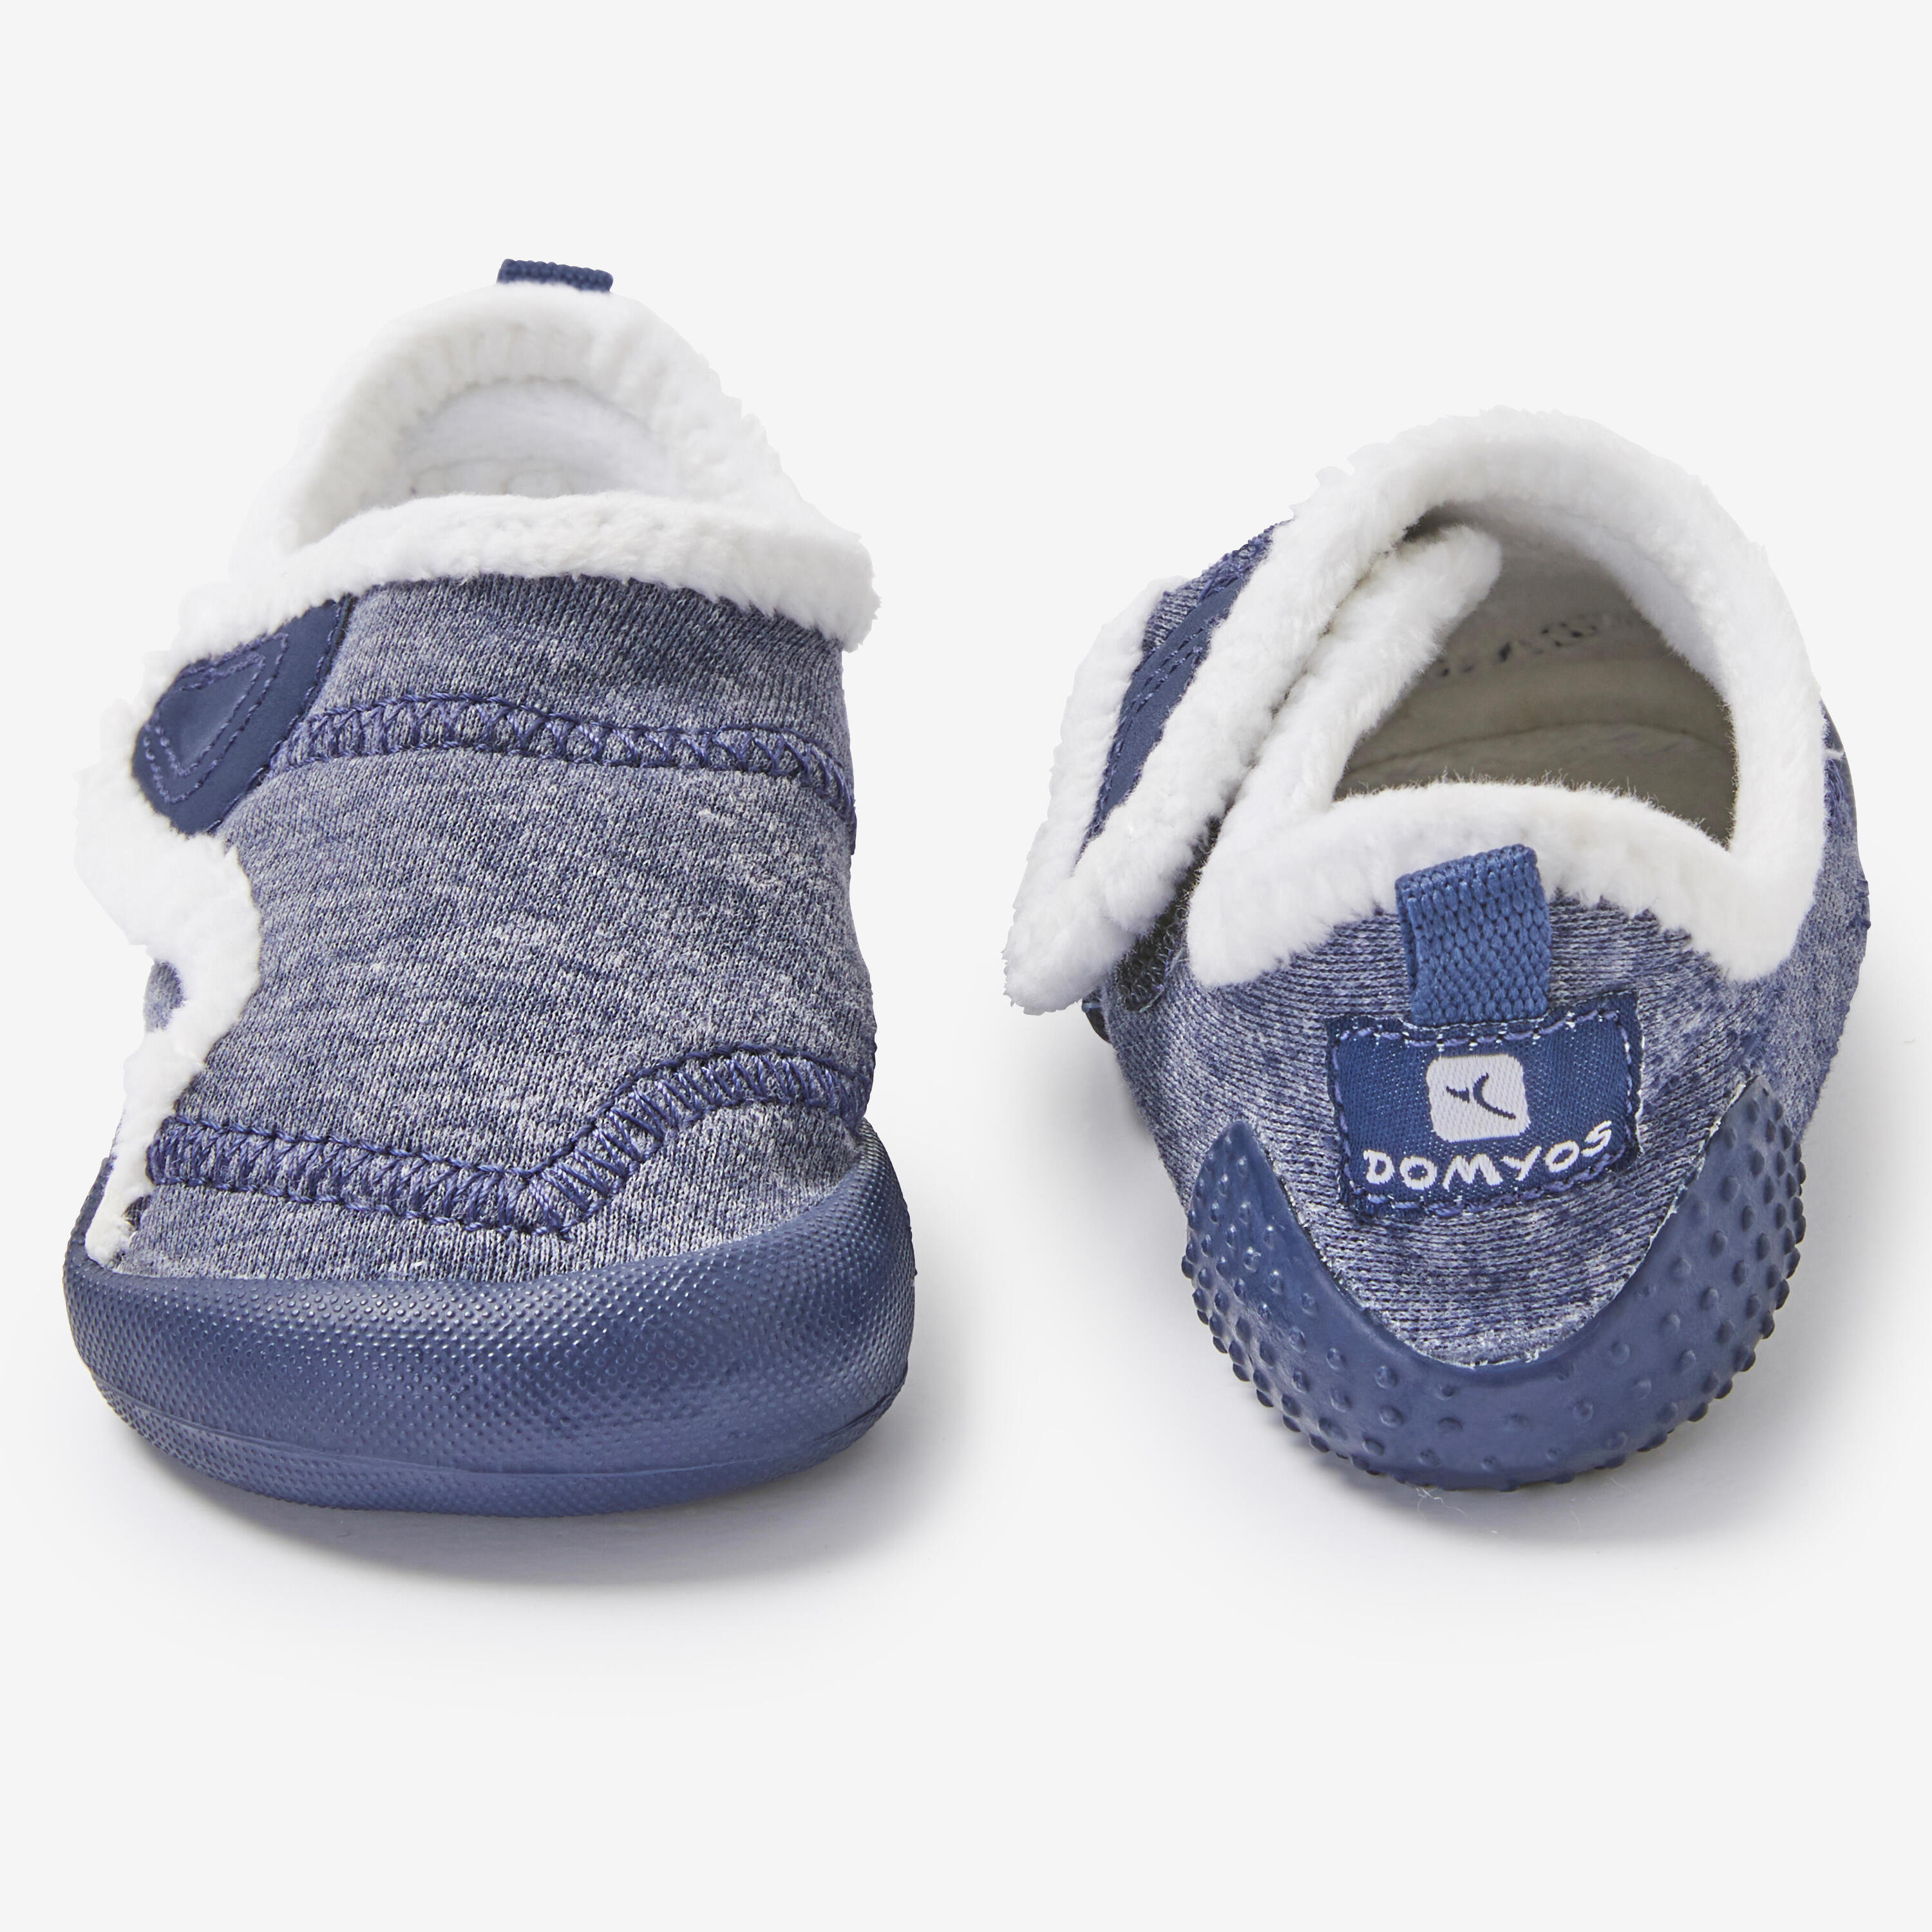 Kids' Soft and Non-Slip Bootee 4/7